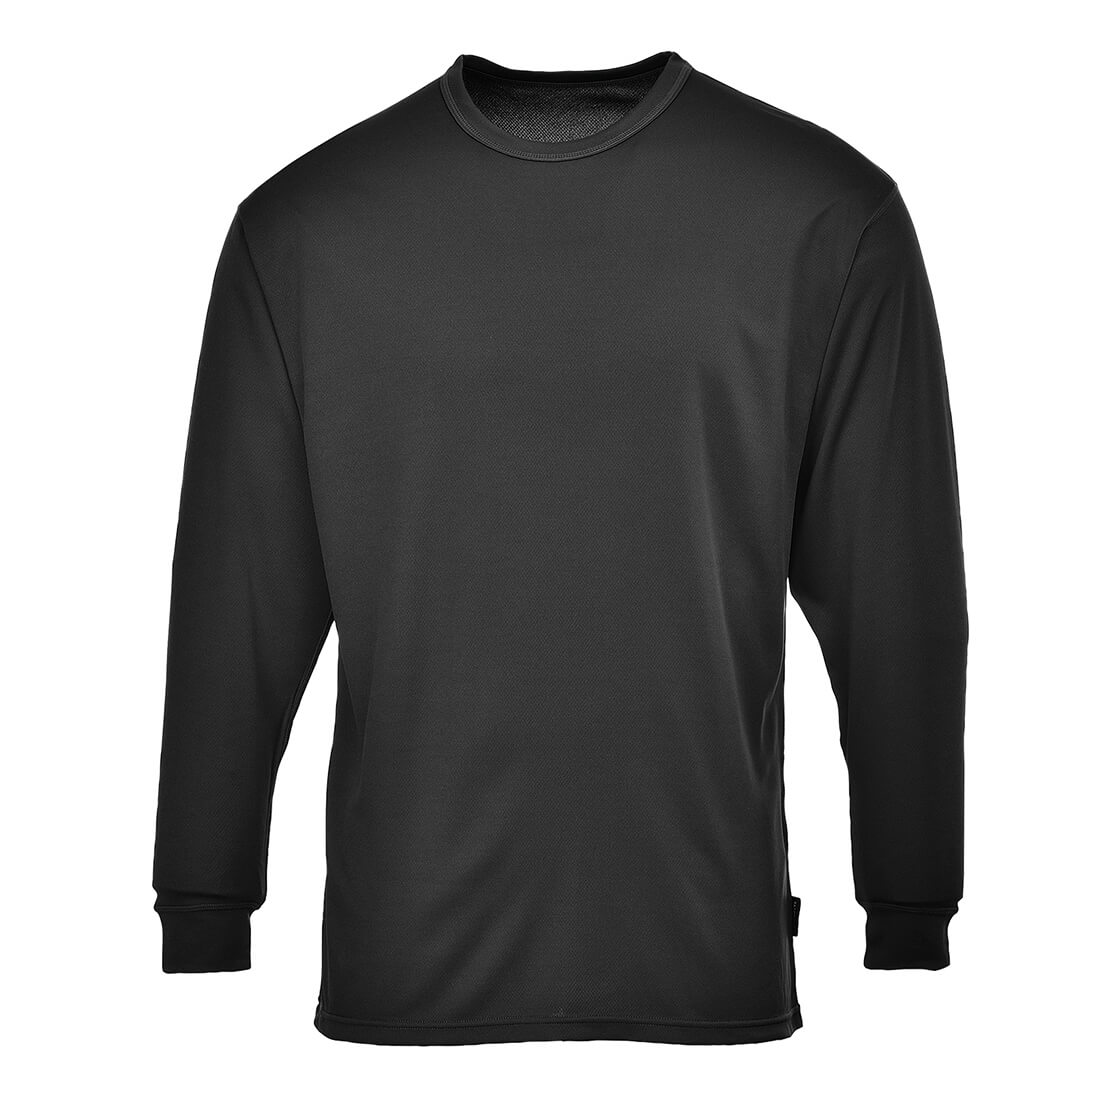 Photo of Base Layer Thermal Top Long Sleeve Black L